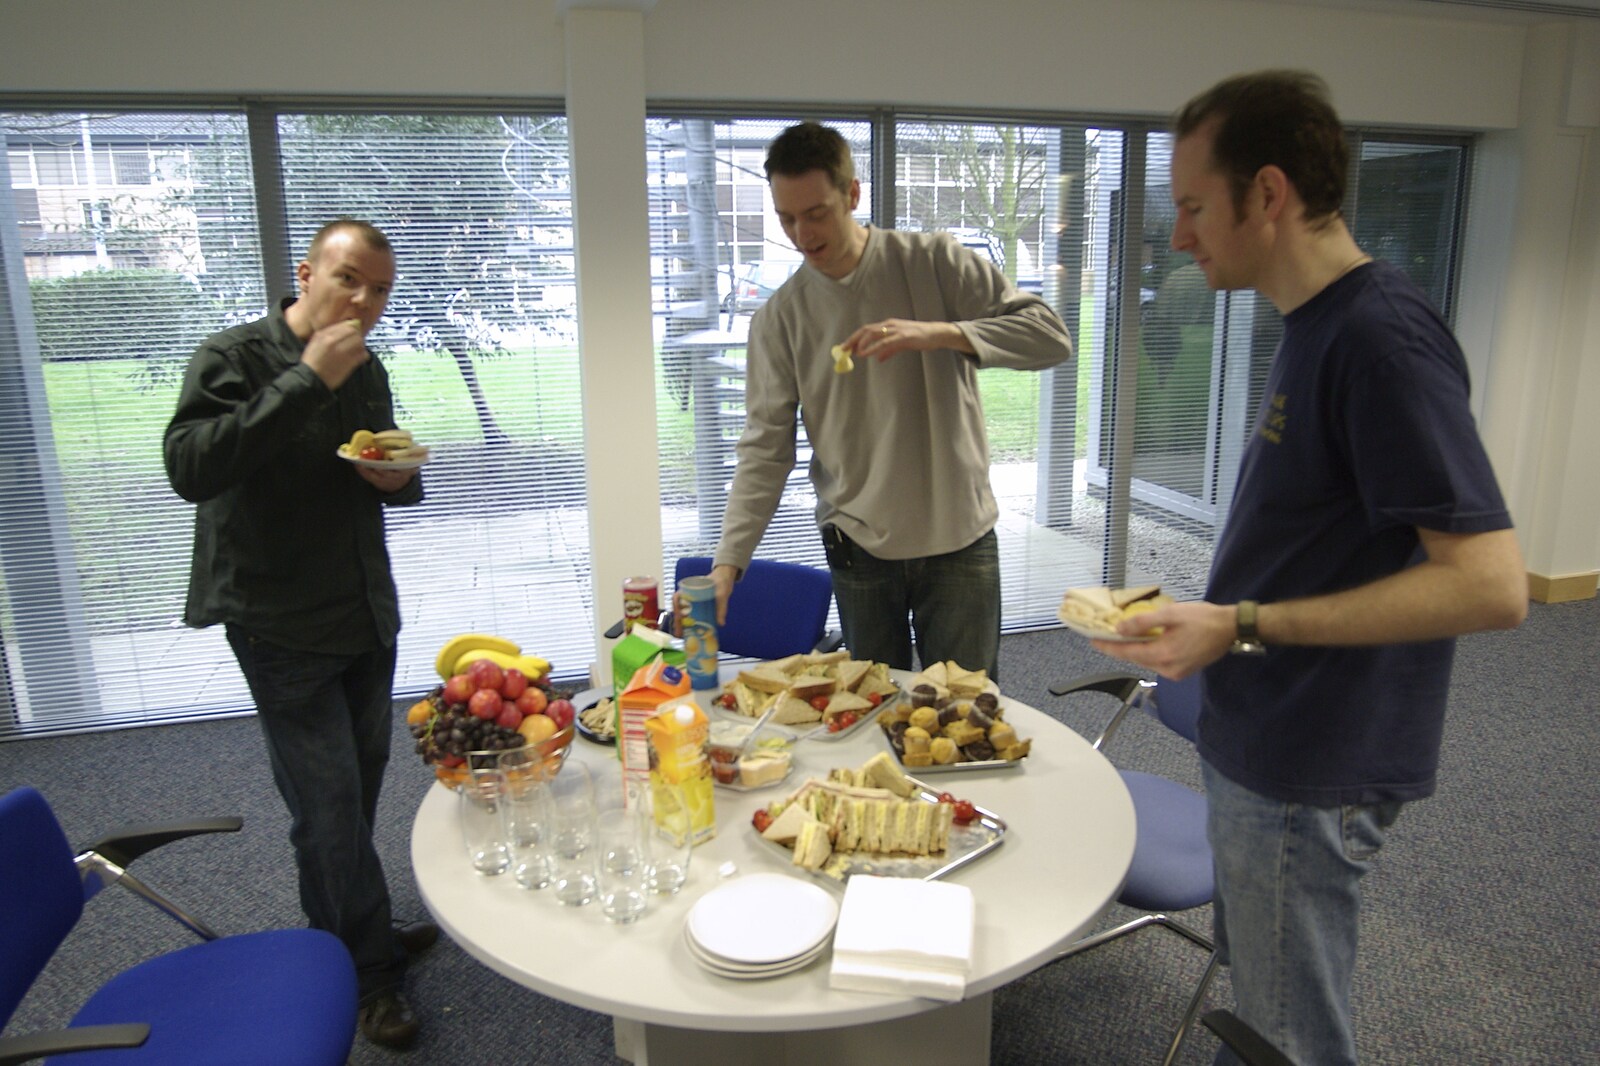 The food is started from Taptu Moves Offices: Crossing Milton Road, Cambridge - 19th February 2007